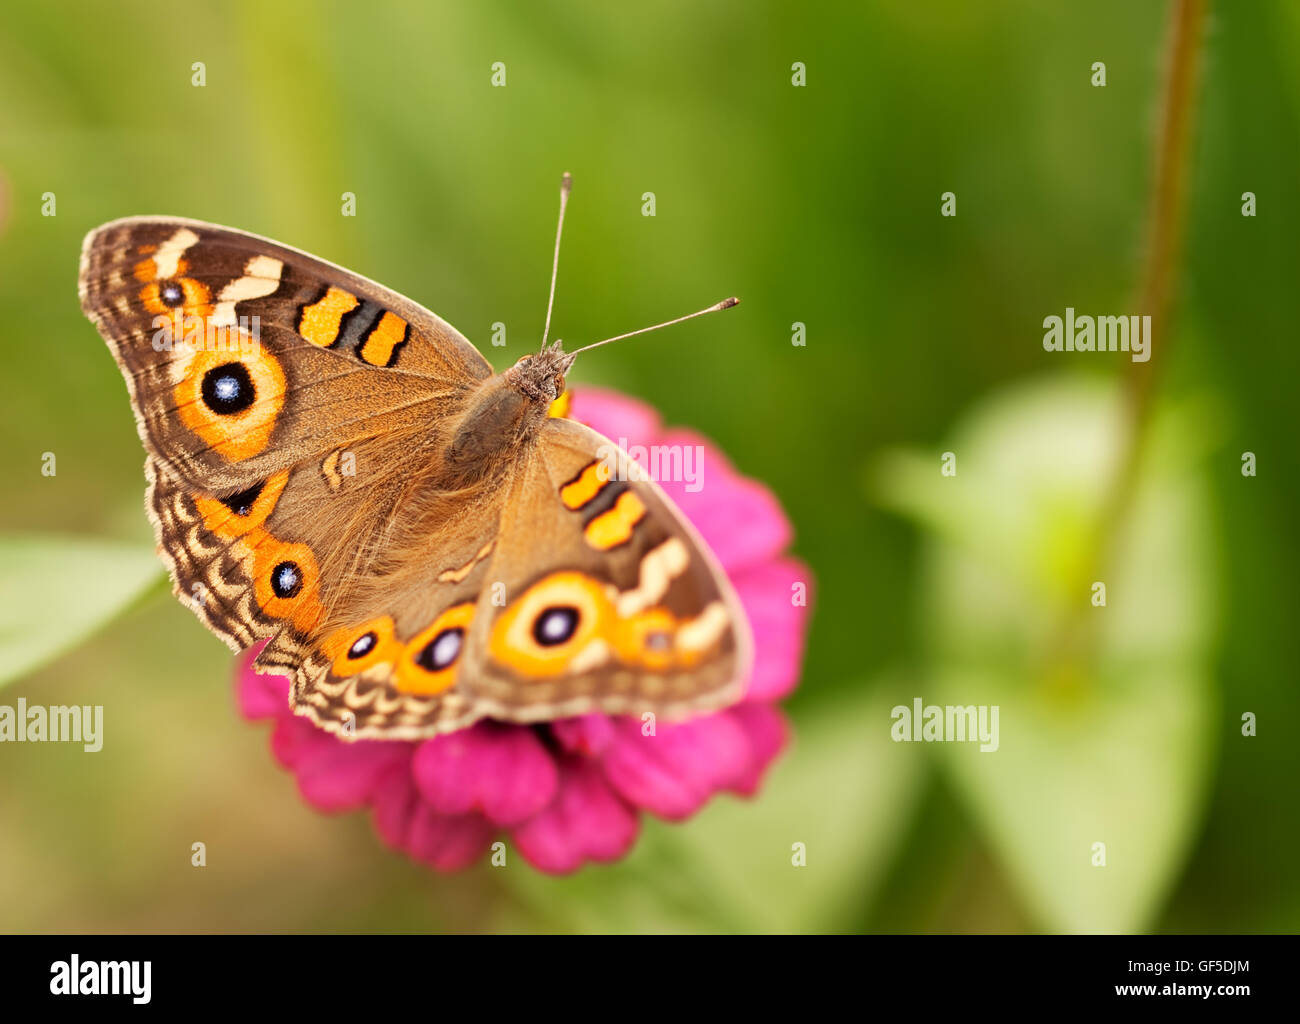 Live insect Australian butterfly Meadow argus Junonia villida brown nymphalidae Stock Photo